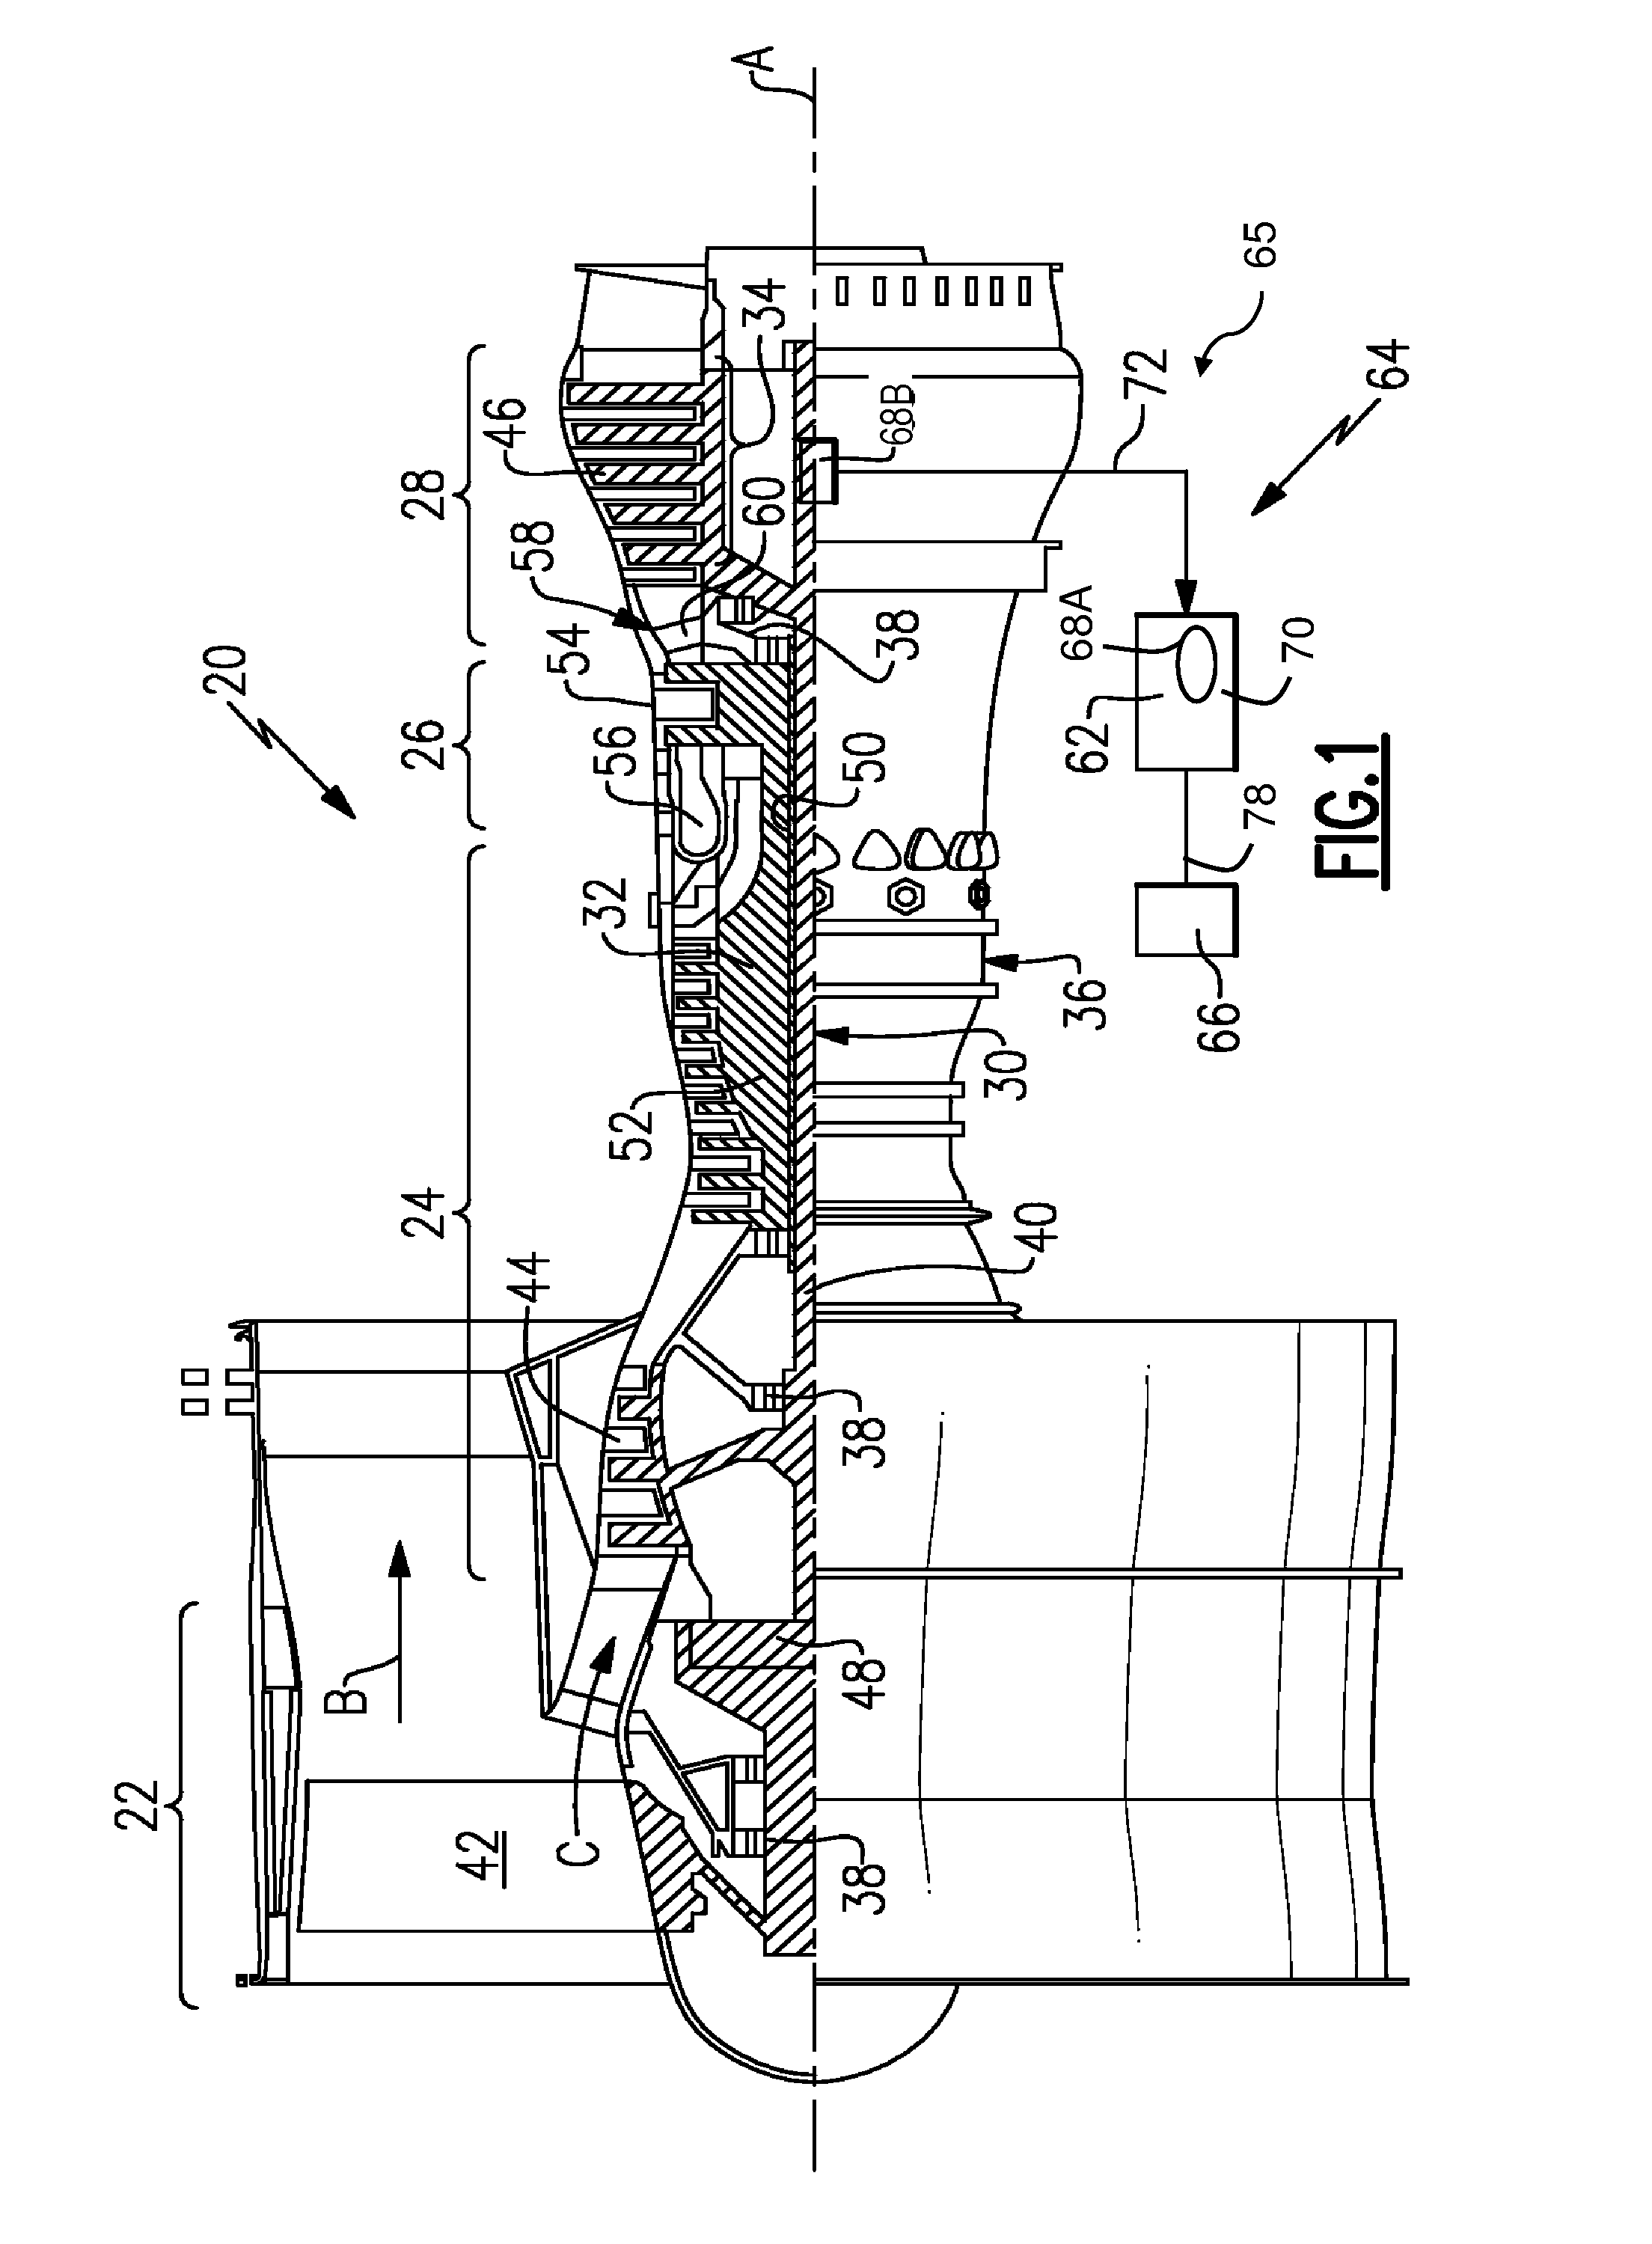 Multi-stage sensing/control/identification device having protected communication and remote power